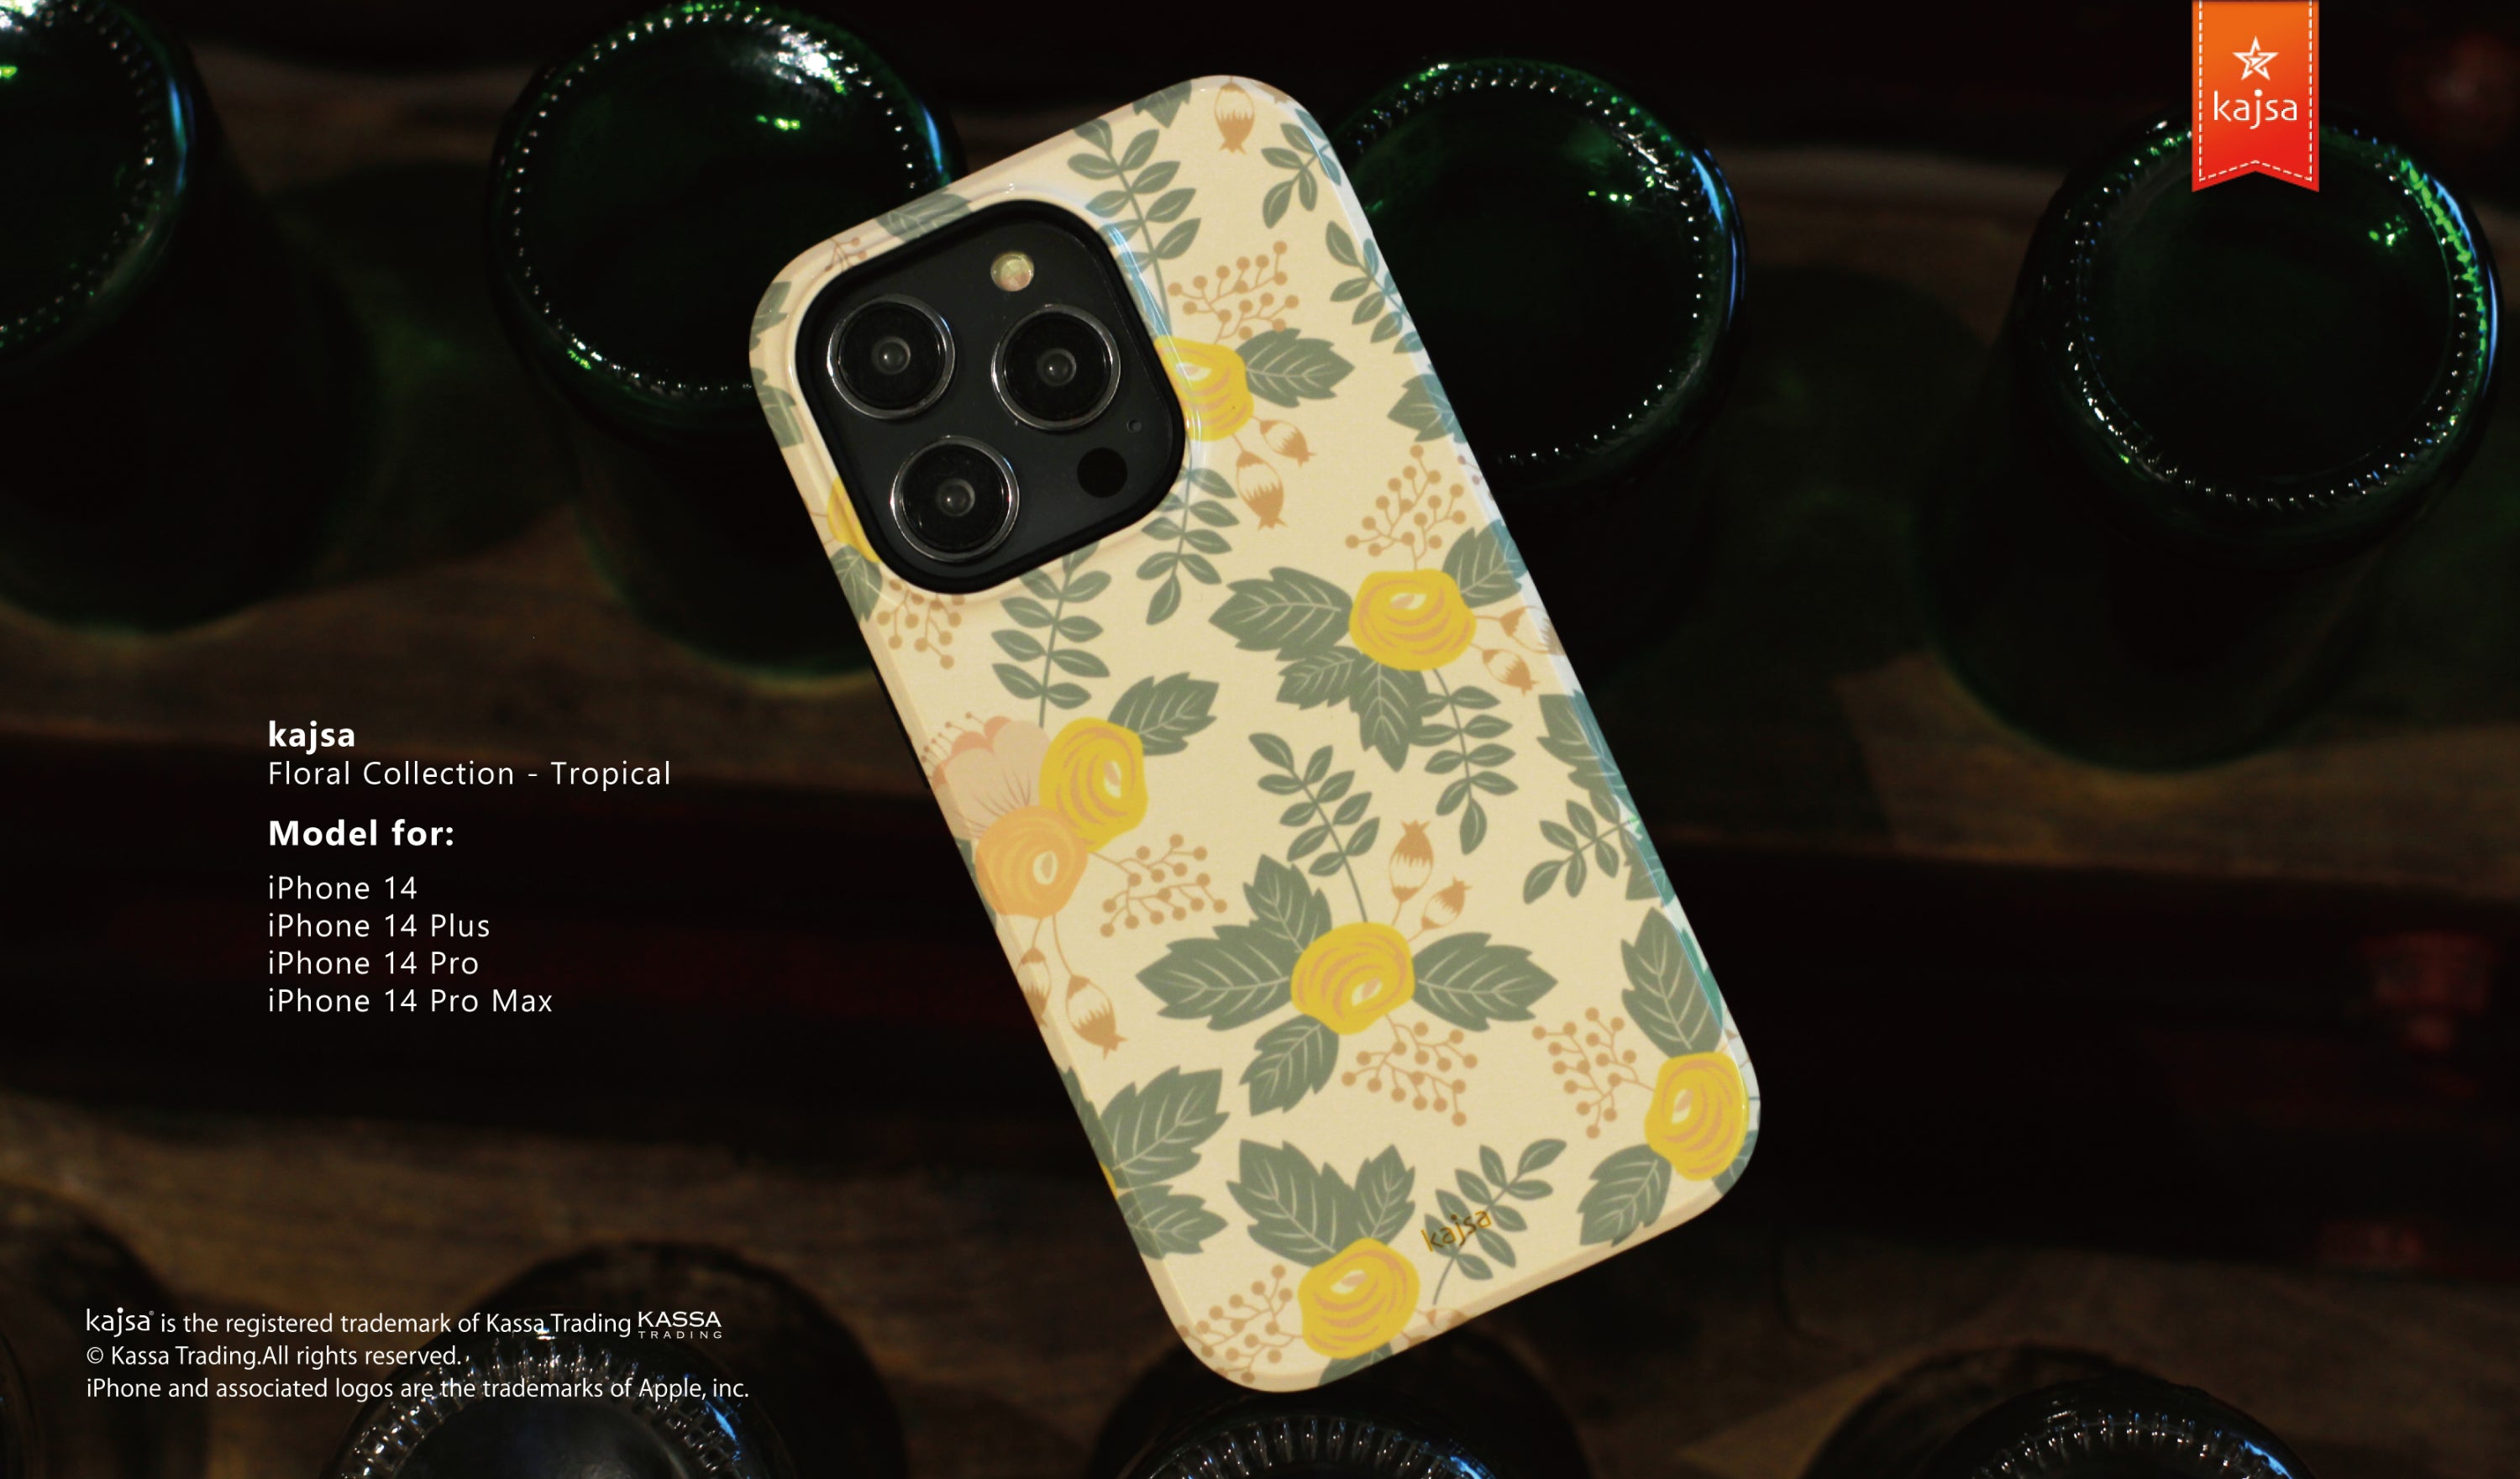 Floral Collection - Tropical Back Base for iPhone 14 (TY7)-Phone Case- phone case - phone cases- phone cover- iphone cover- iphone case- iphone cases- leather case- leather cases- DIYCASE - custom case - leather cover - hand strap case - croco pattern case - snake pattern case - carbon fiber phone case - phone case brand - unique phone case - high quality - phone case brand - protective case - buy phone case hong kong - online buy phone case - iphone‎手機殼 - 客製化手機殼 - samsung ‎手機殼 - 香港手機殼 - 買電話殼